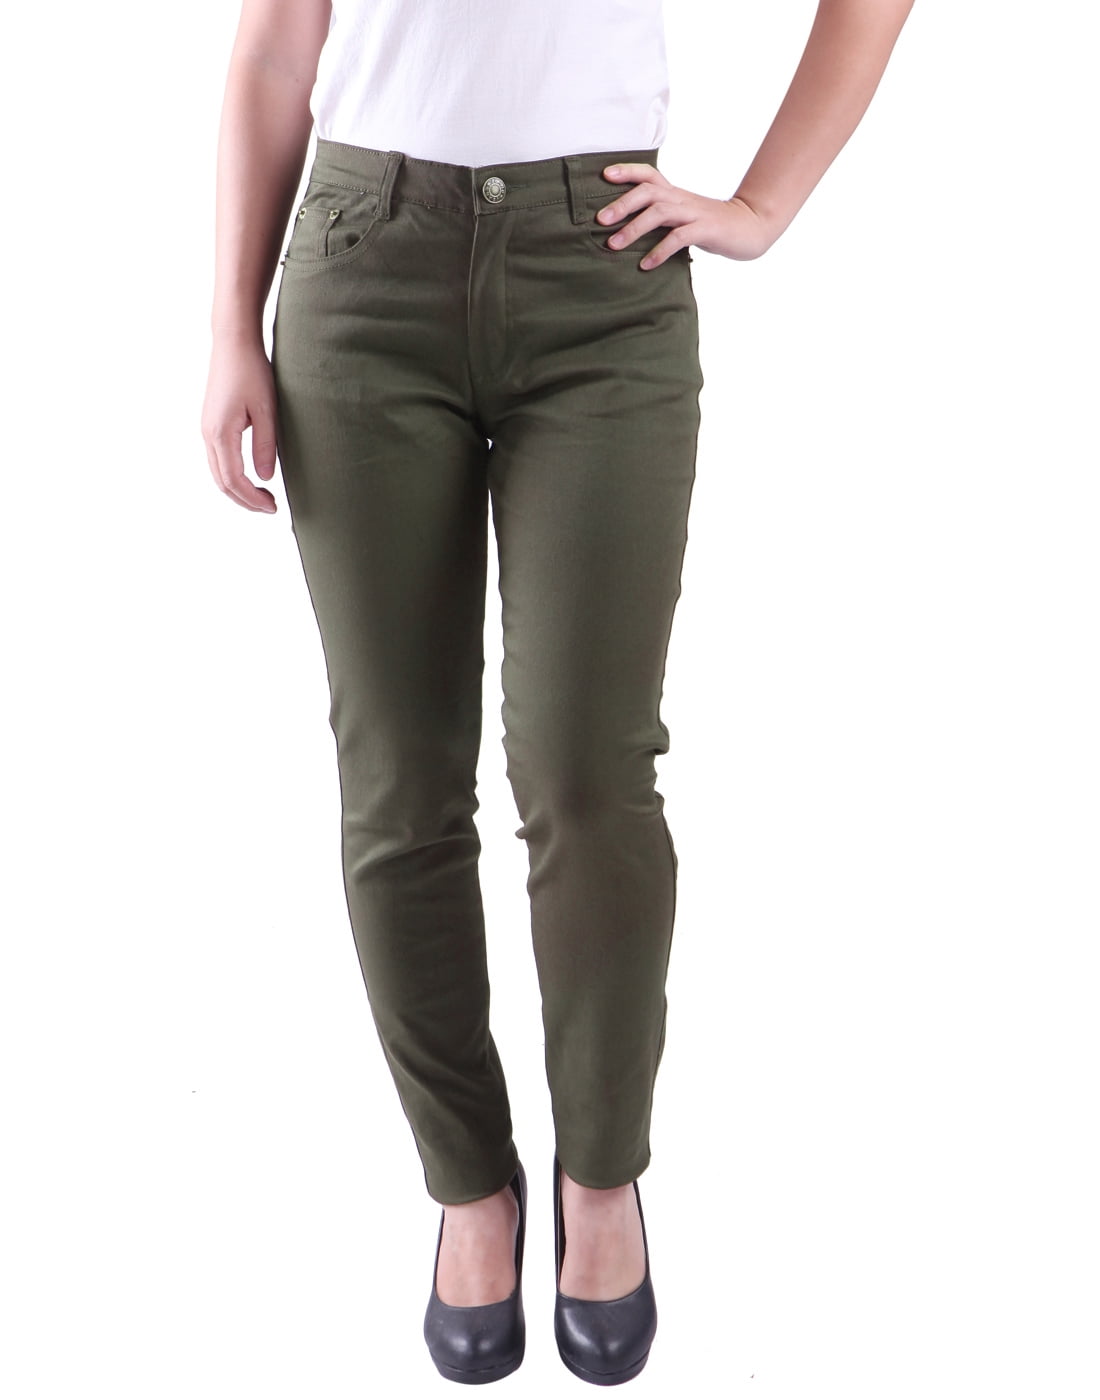 womens olive green jeggings